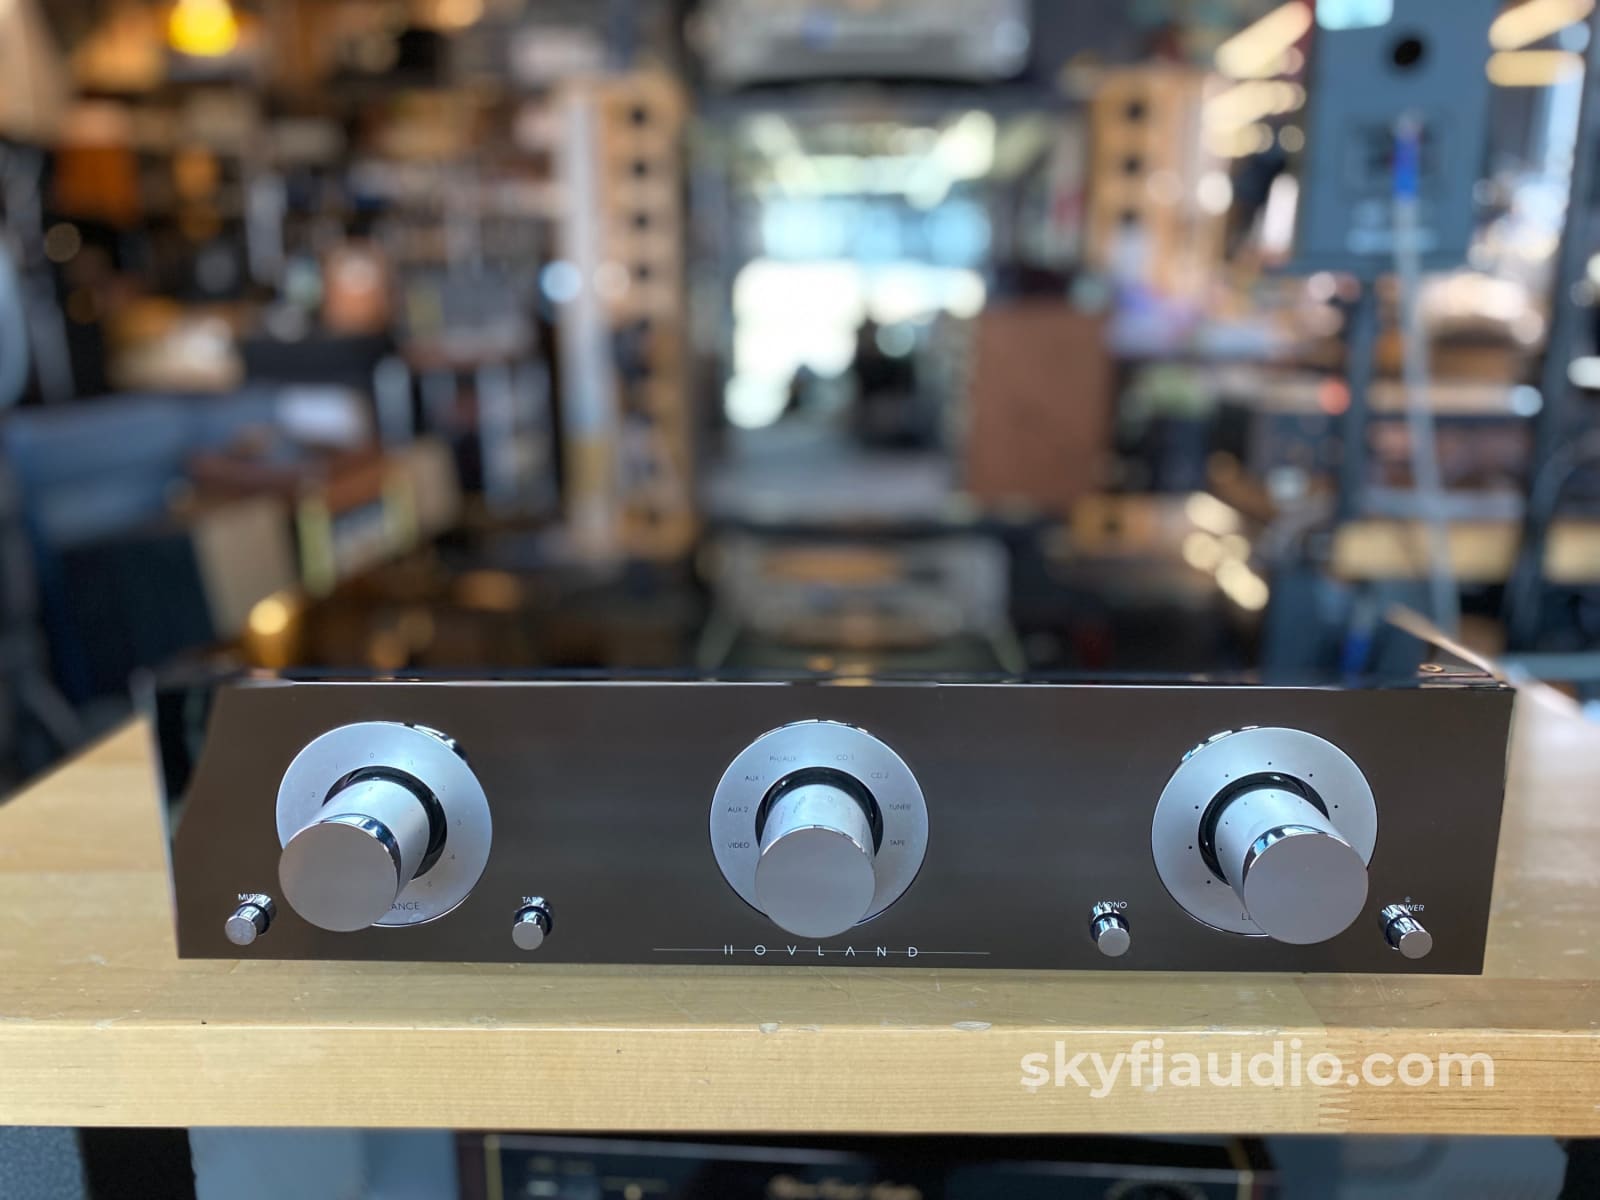 Hovland Hp-100 Tube Analogue Preamp - Stunning Inside And Out! Preamplifier